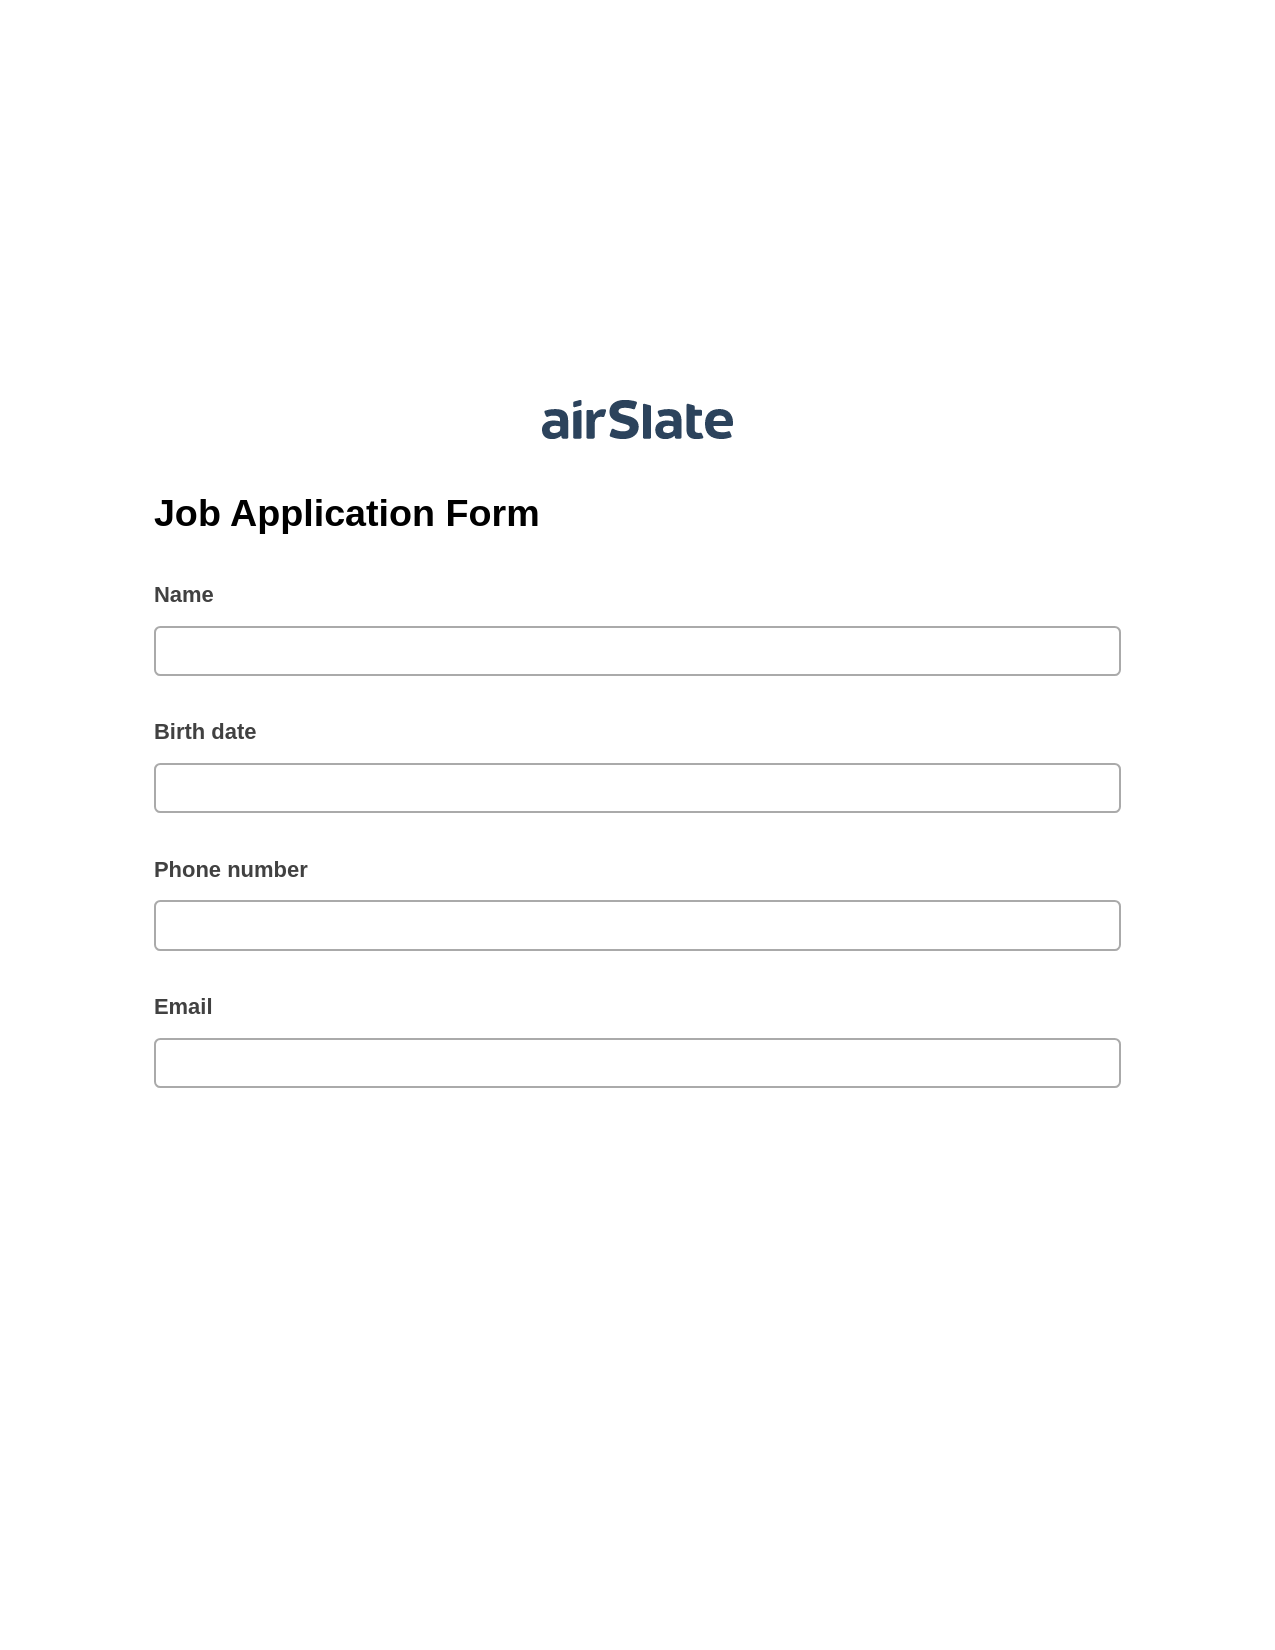 Multirole Job Application Form Pre-fill from Google Sheet Dropdown Options Bot, System Bot - Create a Slate in another Flow, Webhook Postfinish Bot